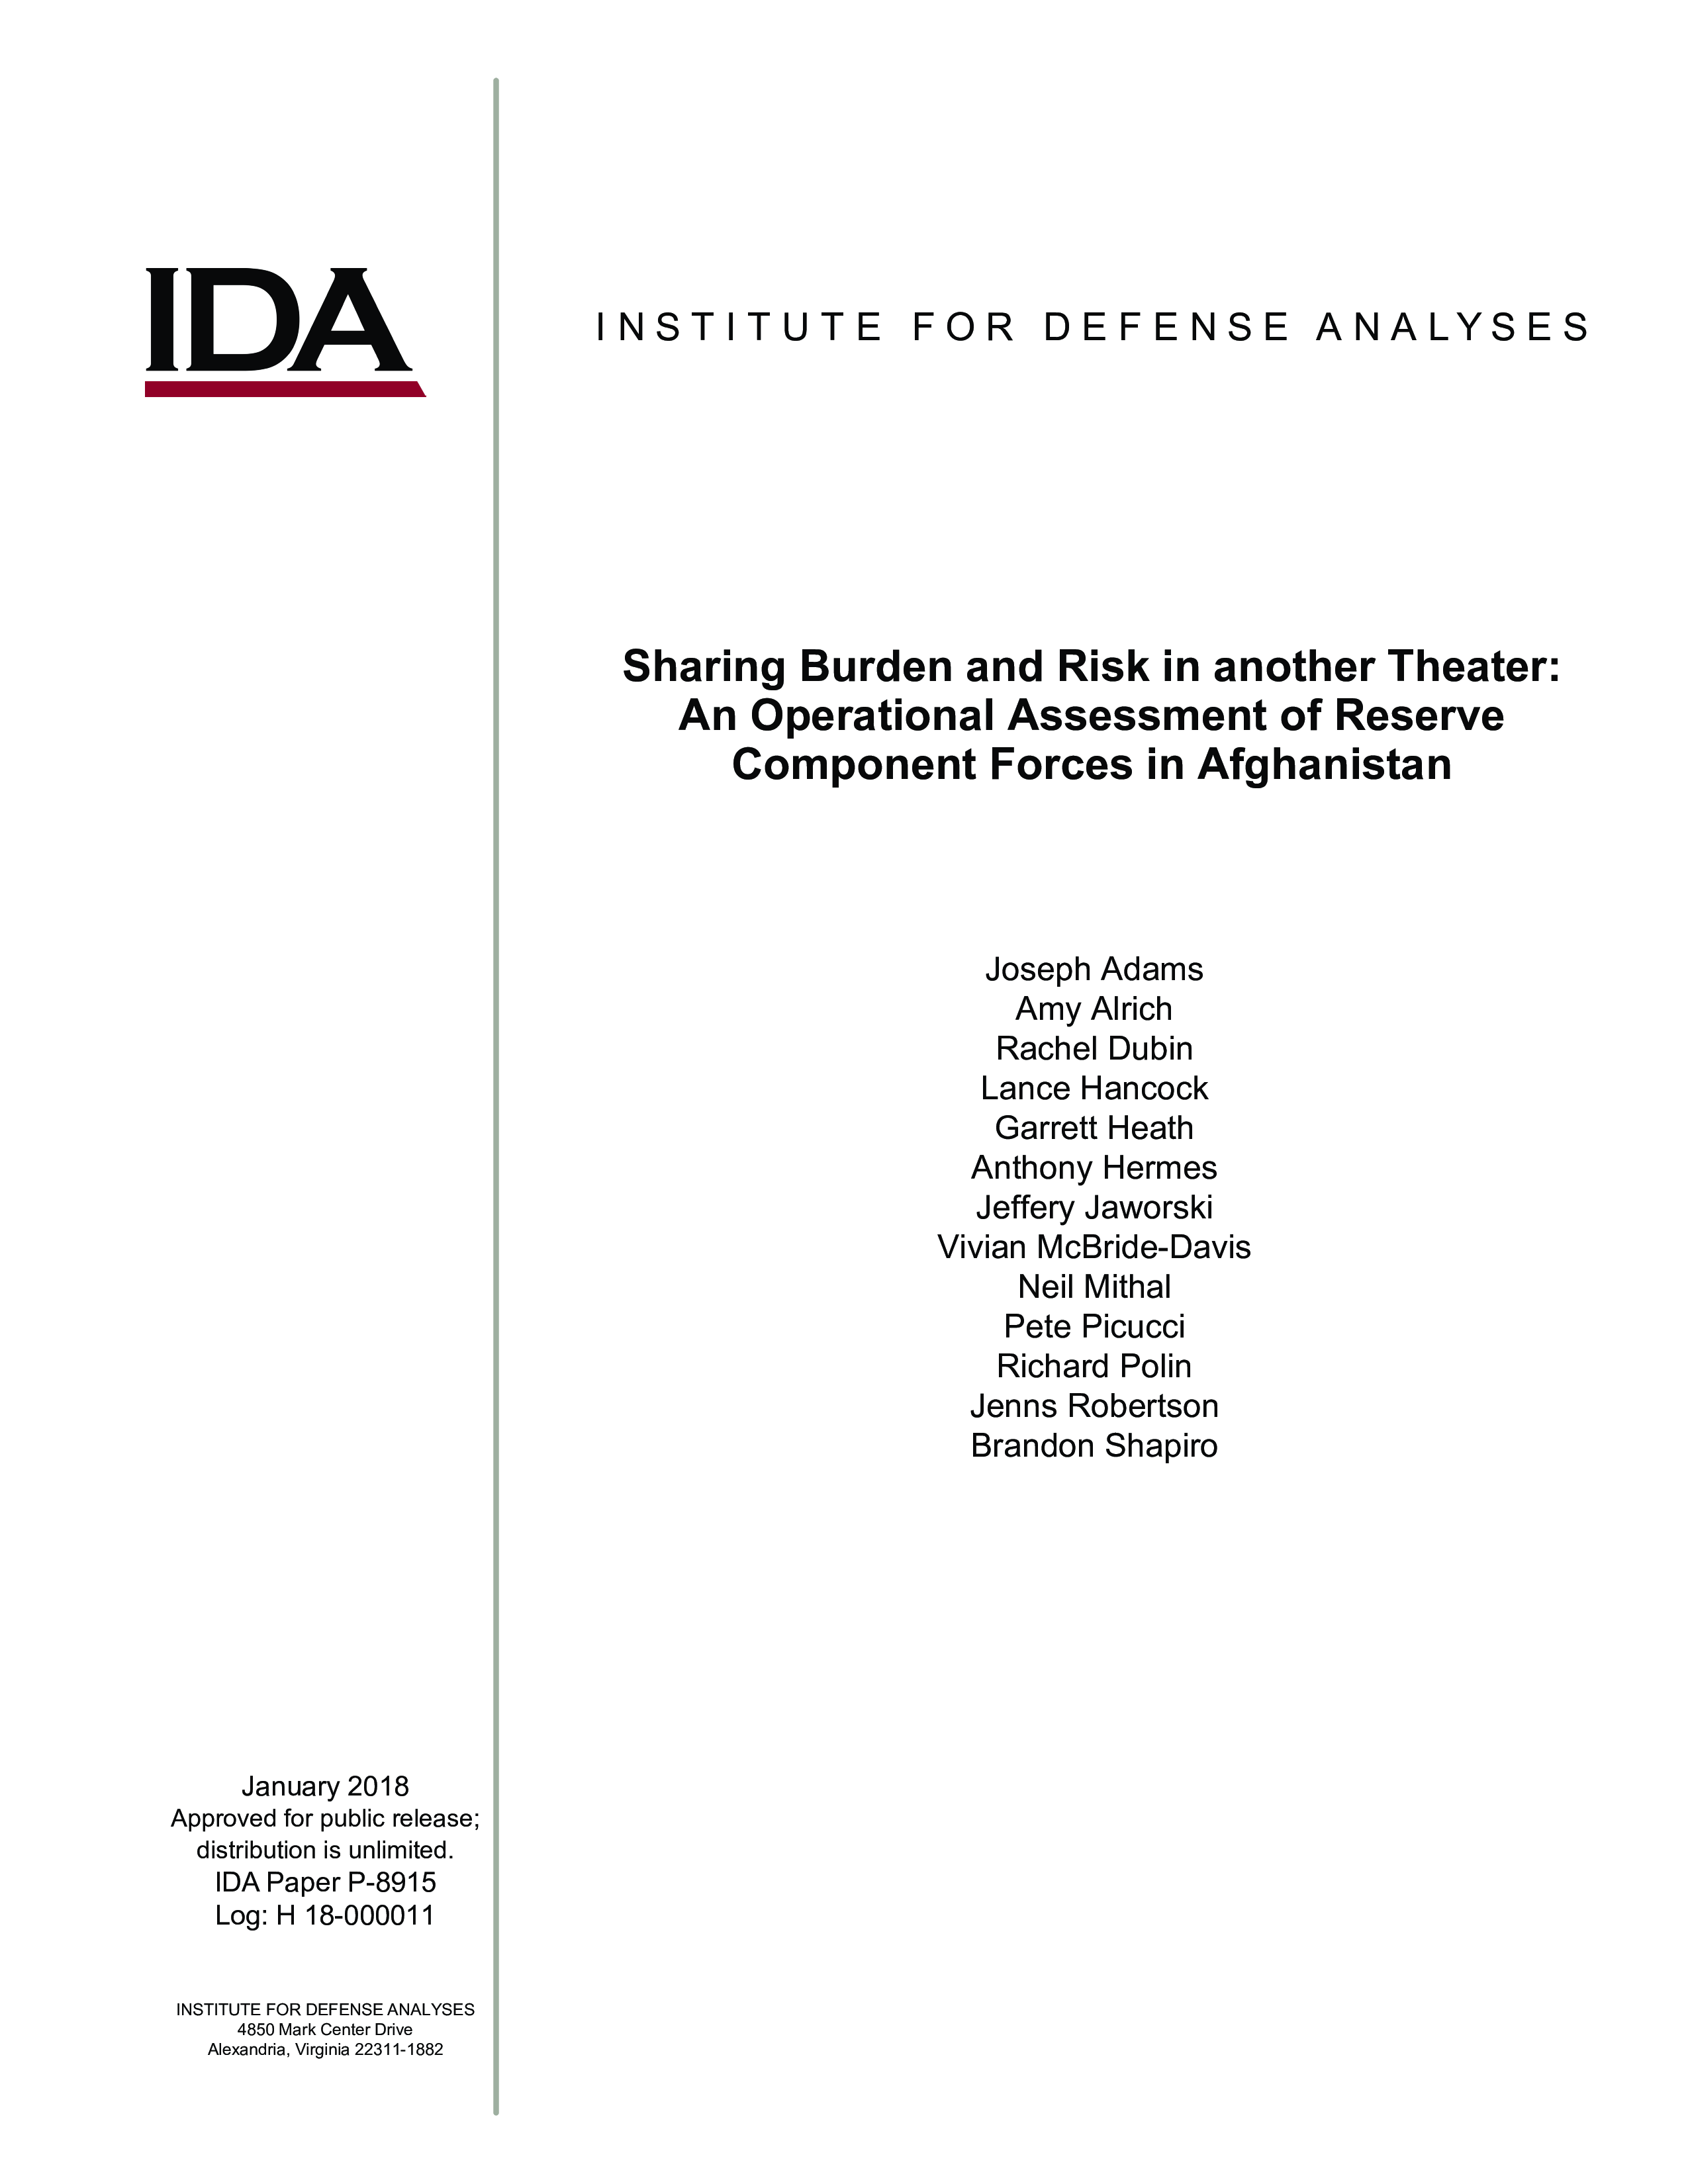 Sharing Burden and Risk in another Theater: An Operational Assessment of Reserve Component Forces in Afghanistan